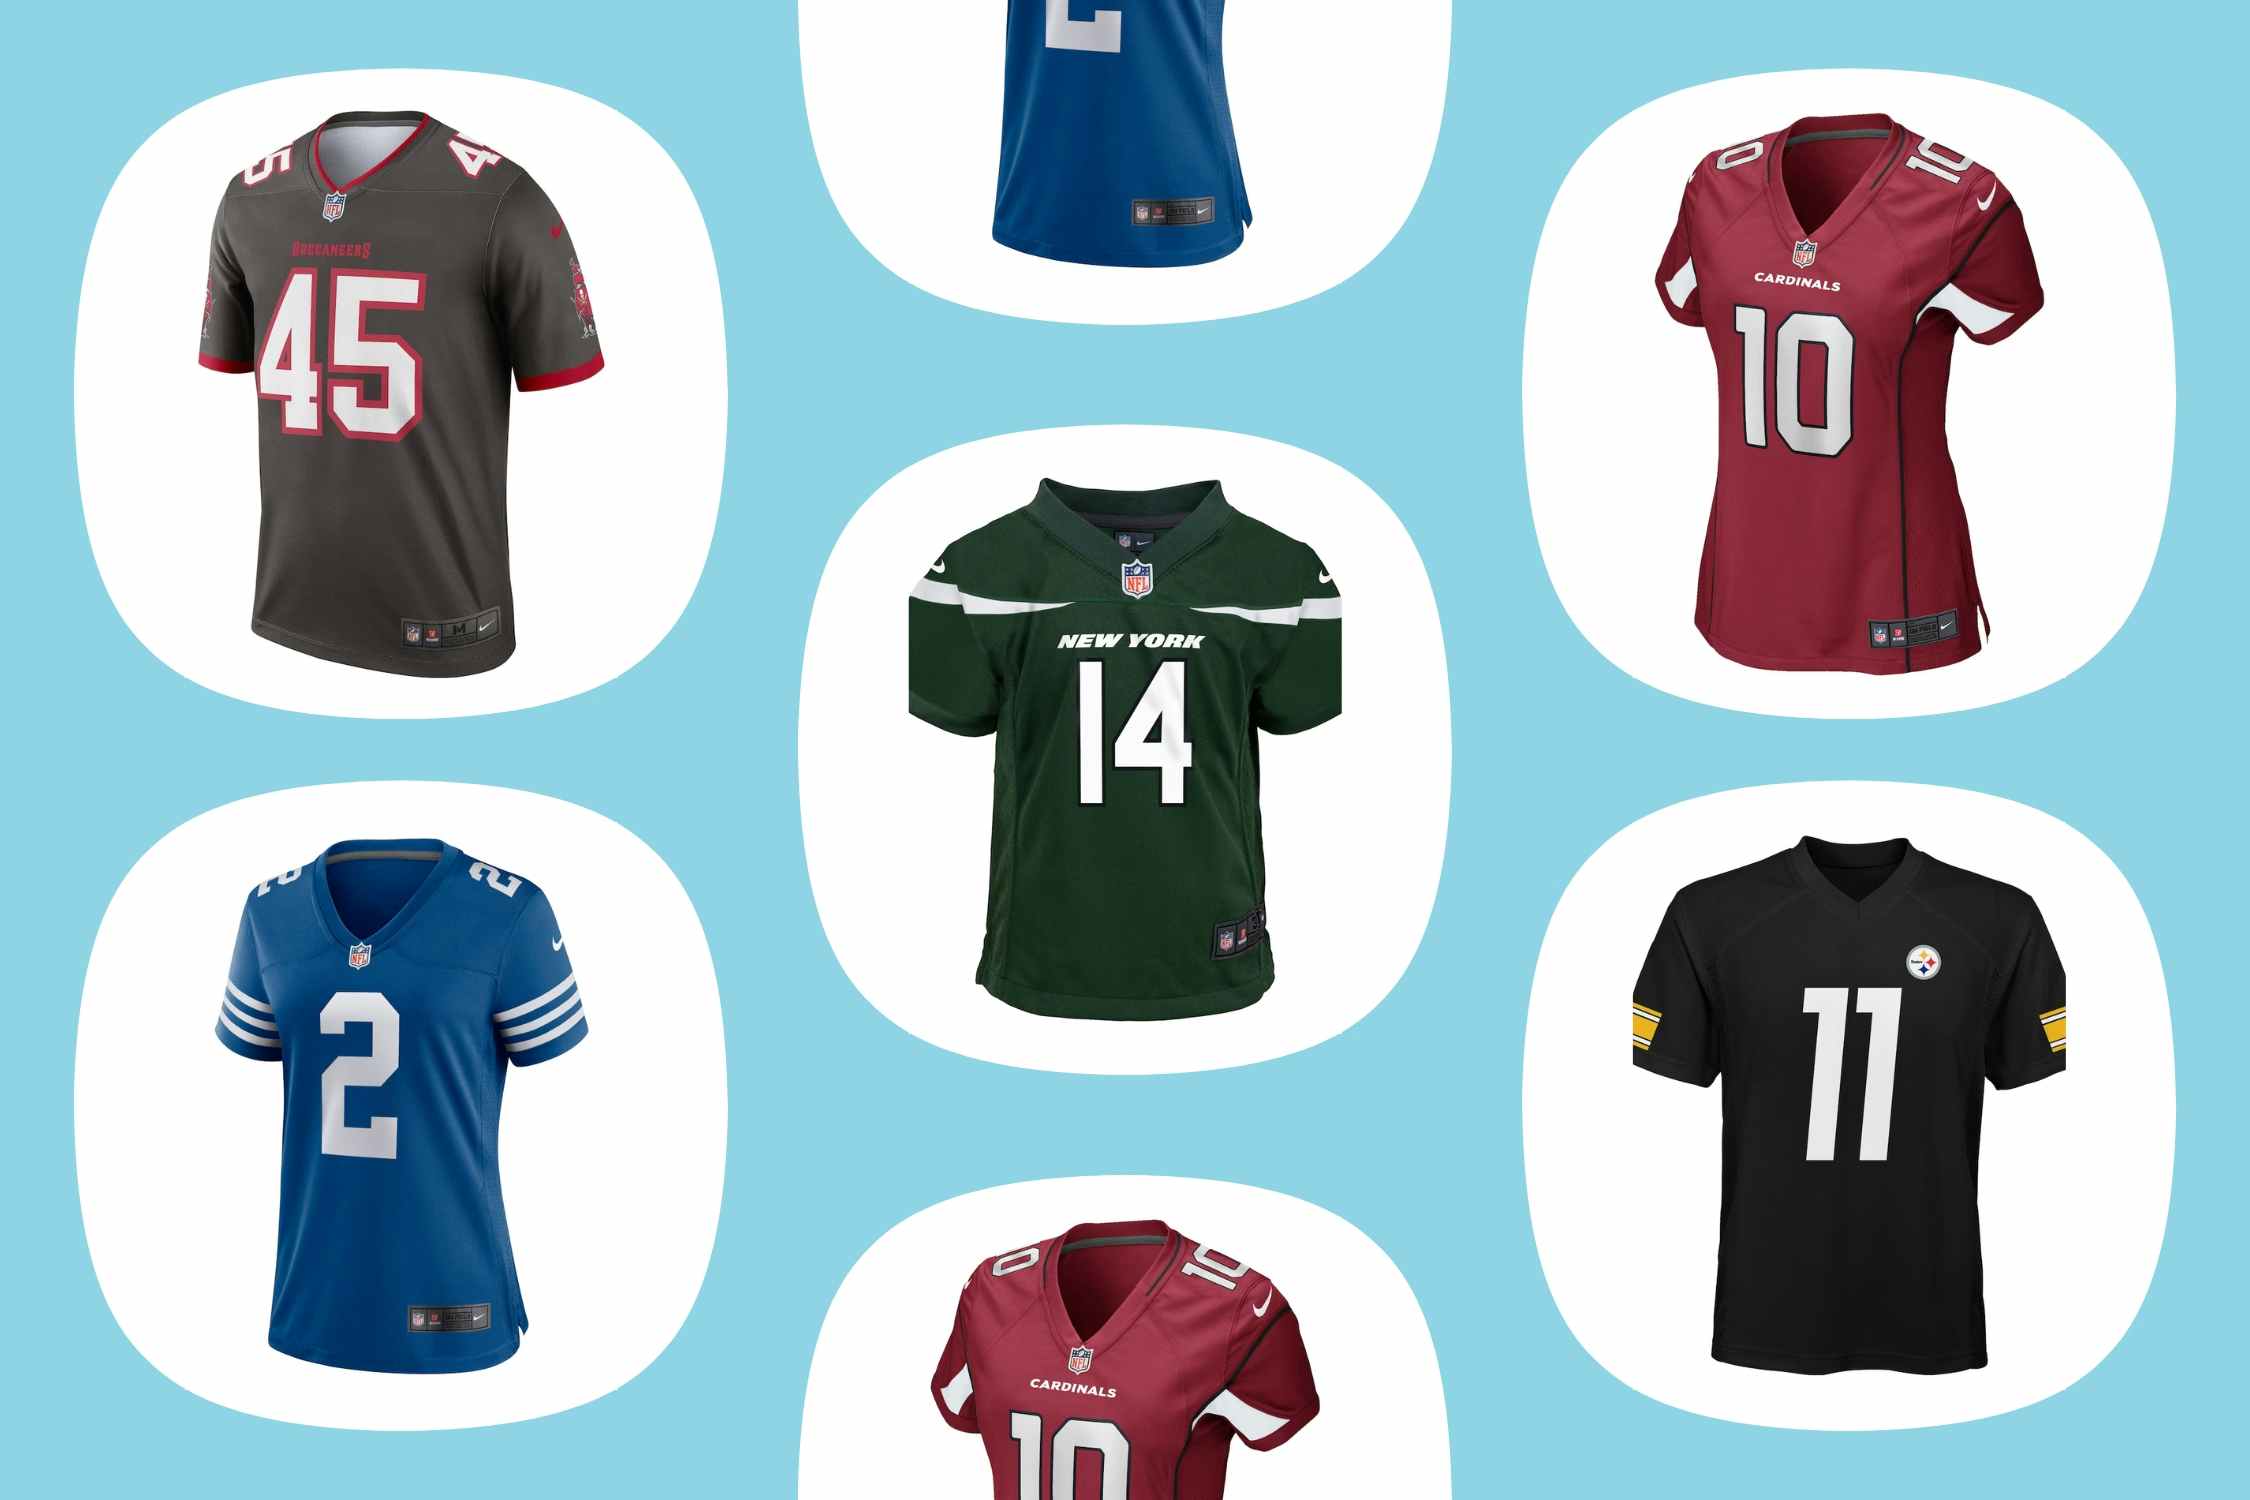 NFL Jersey Clearance: $11 Baby, $15 Kids, and $20 Adult Styles